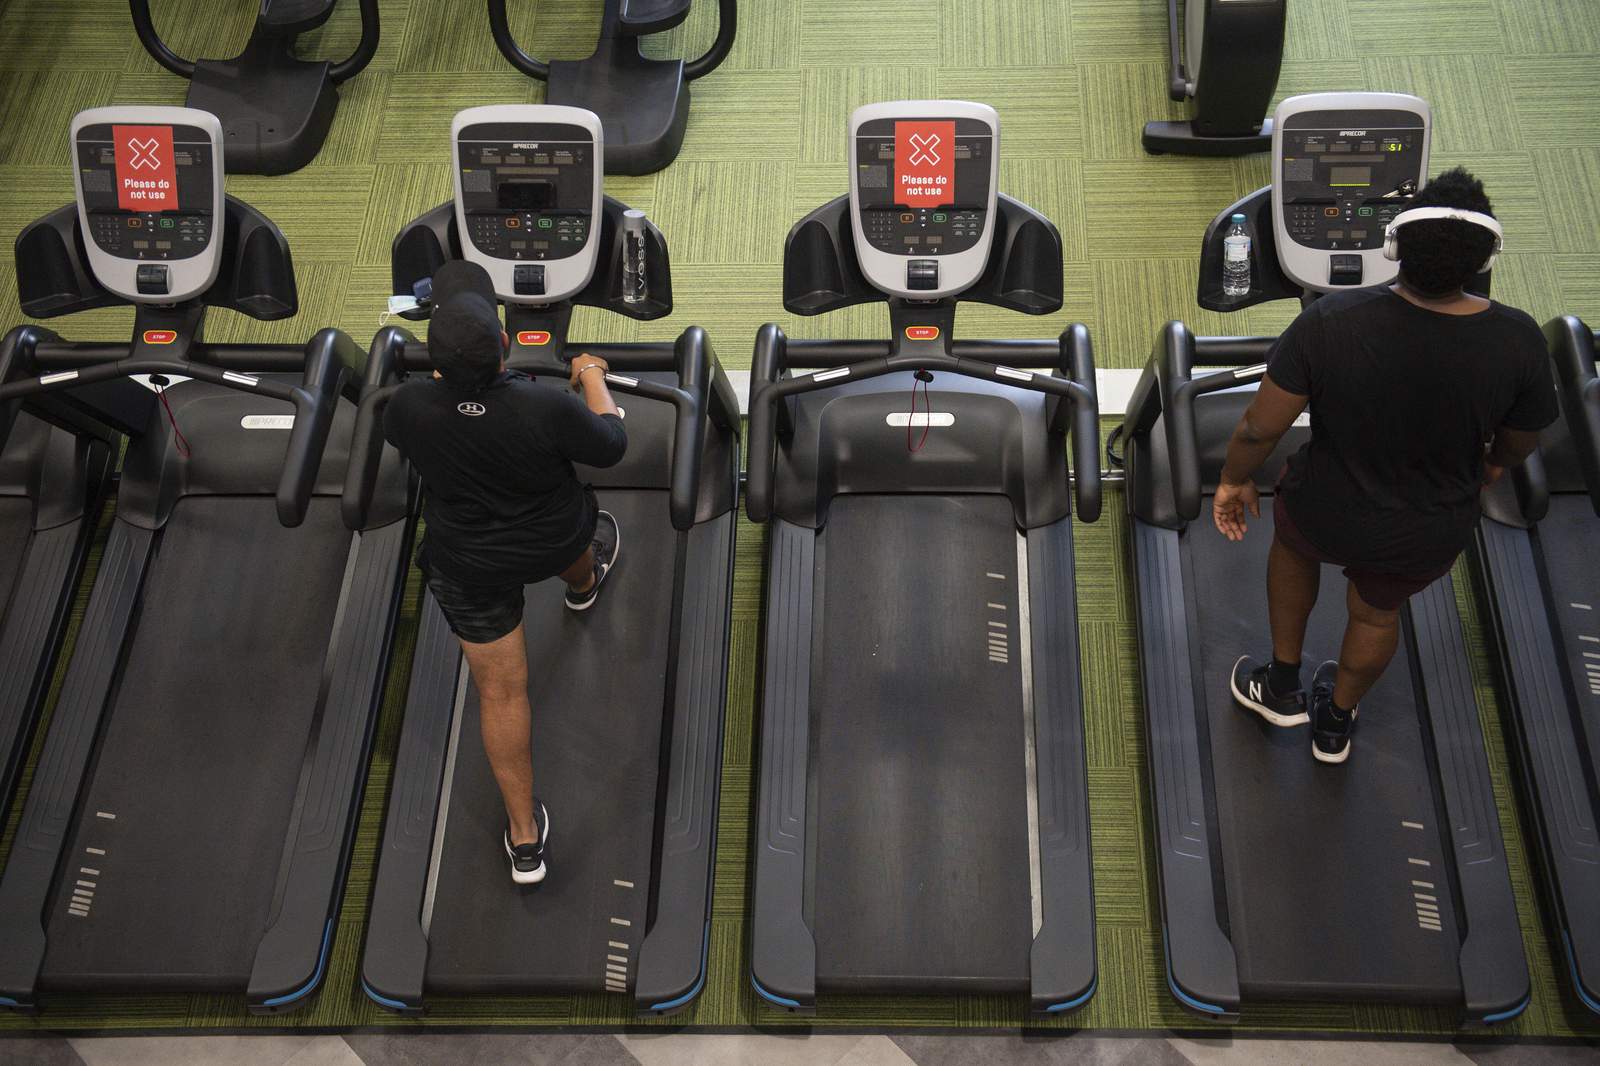 Here are 3 ways to cancel your gym membership when theyre making it difficult